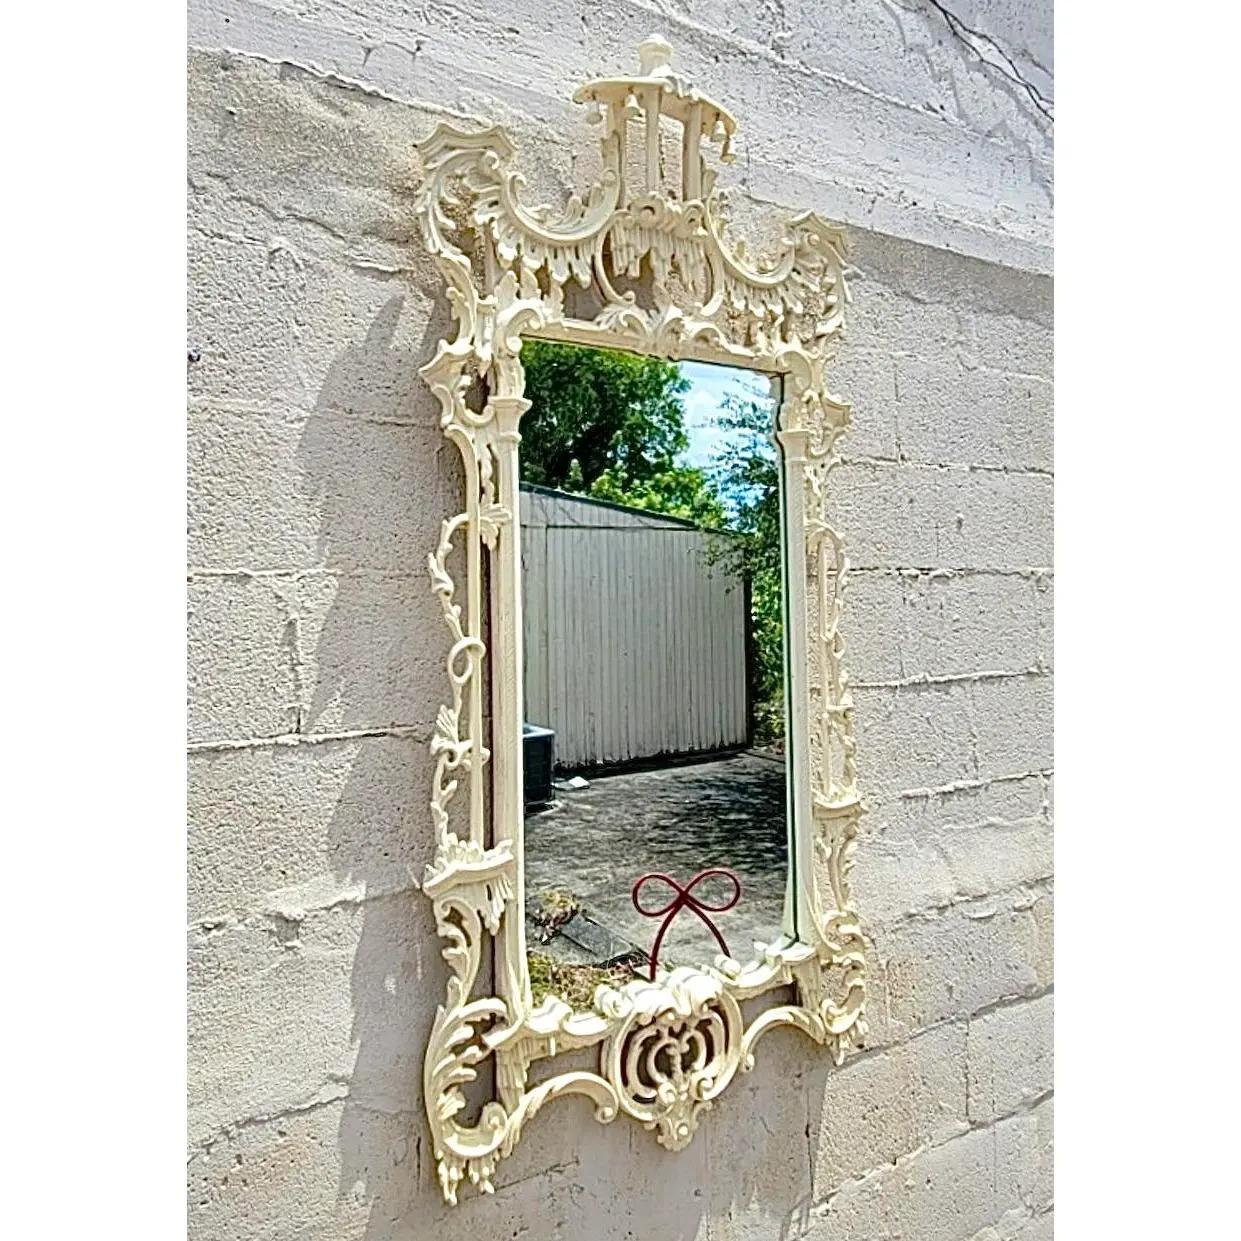 Fantastic vintage Chinoiserie mirror. A classic pagoda shape with hand carved detail and four small bells across the roofline. Acquired from a Palm Beach estate.